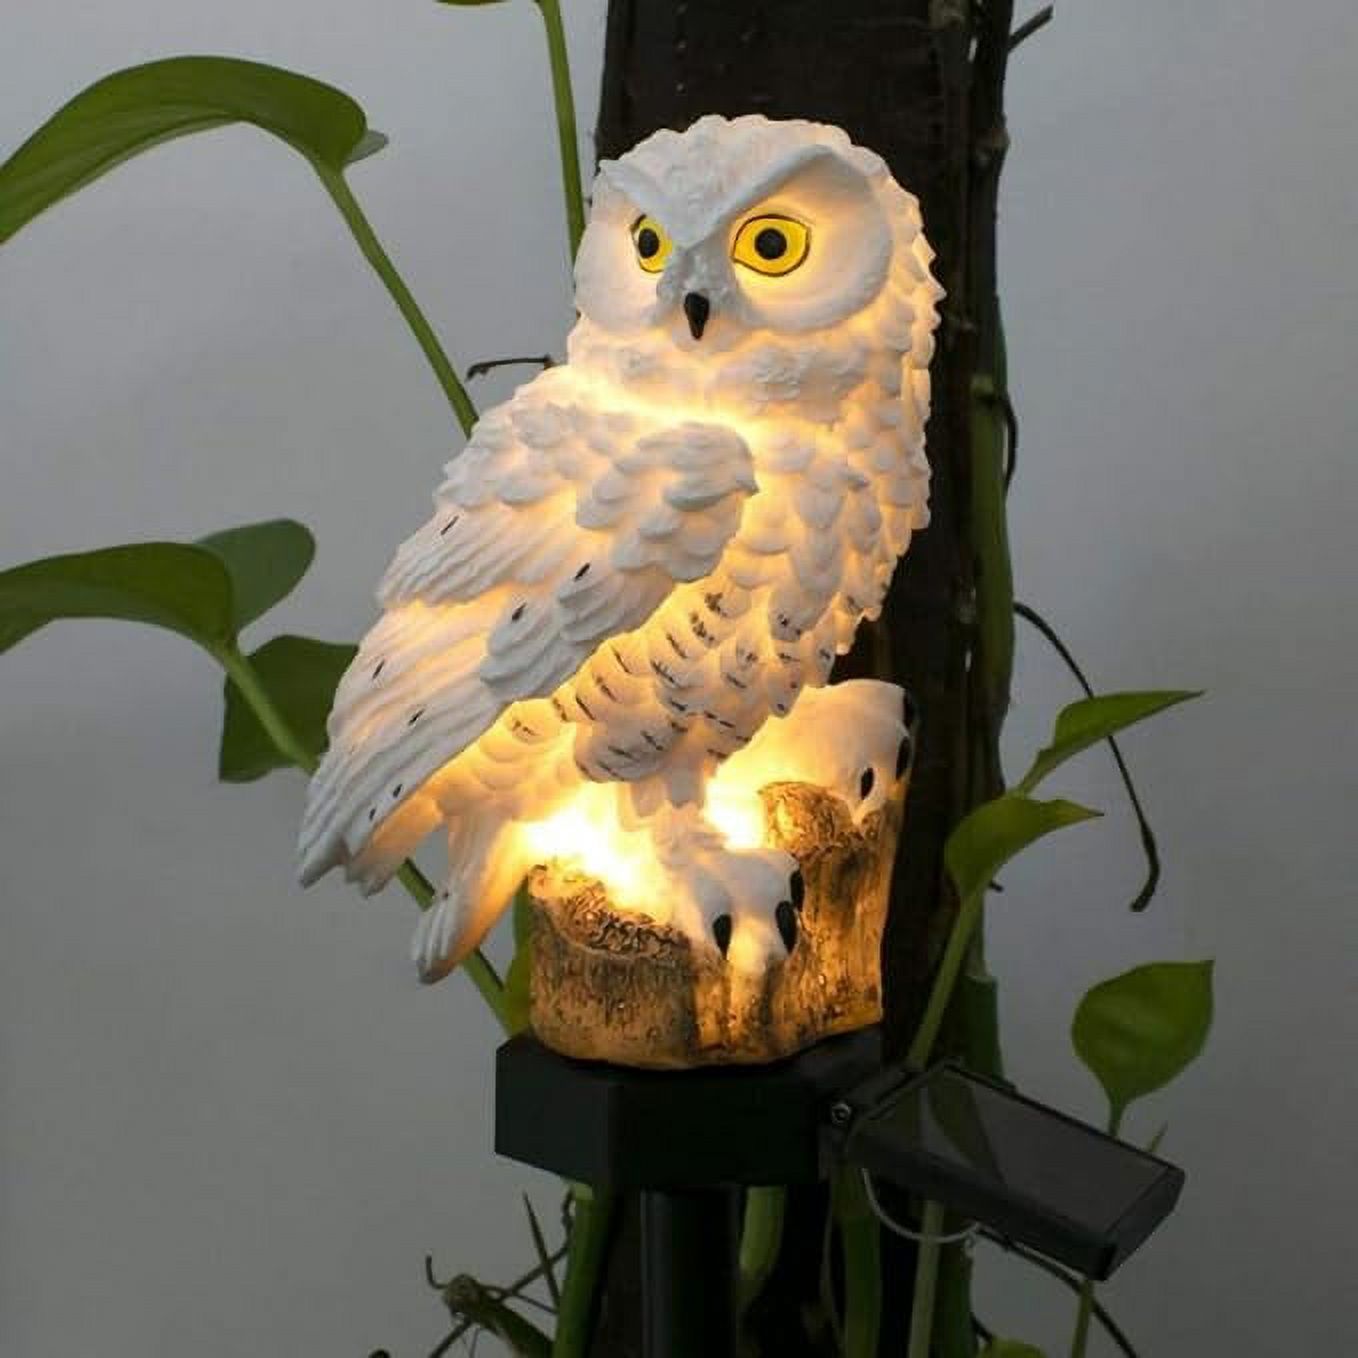 Garden Solar Lights Outdoor Decorative Resin Owl Solar LED Lights with Stake for Garden Lawn Pathway Yard Decortions - image 4 of 8